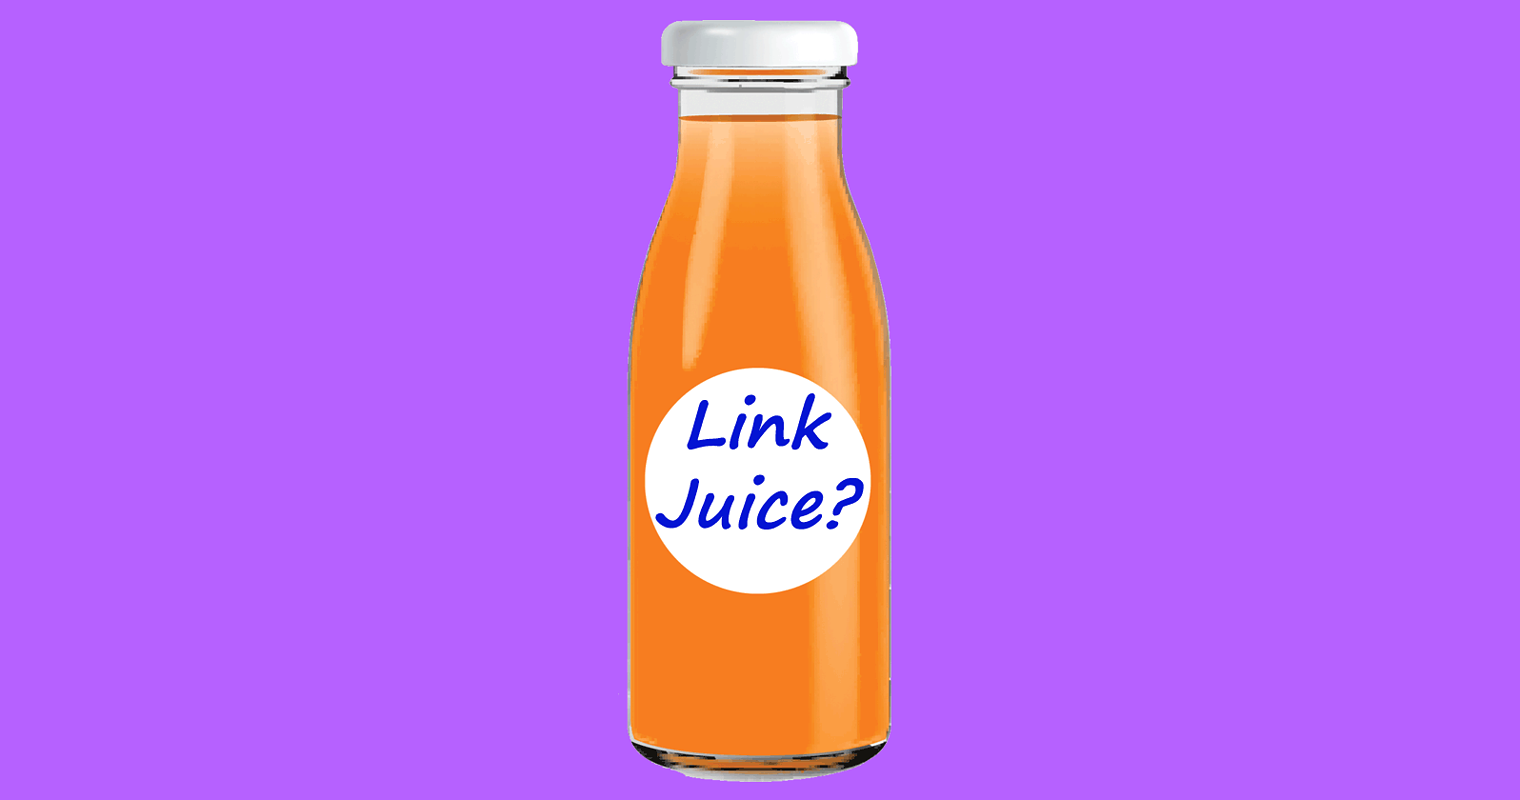 Google Says Don’t Focus on “Link Juice” Focus on this Instead